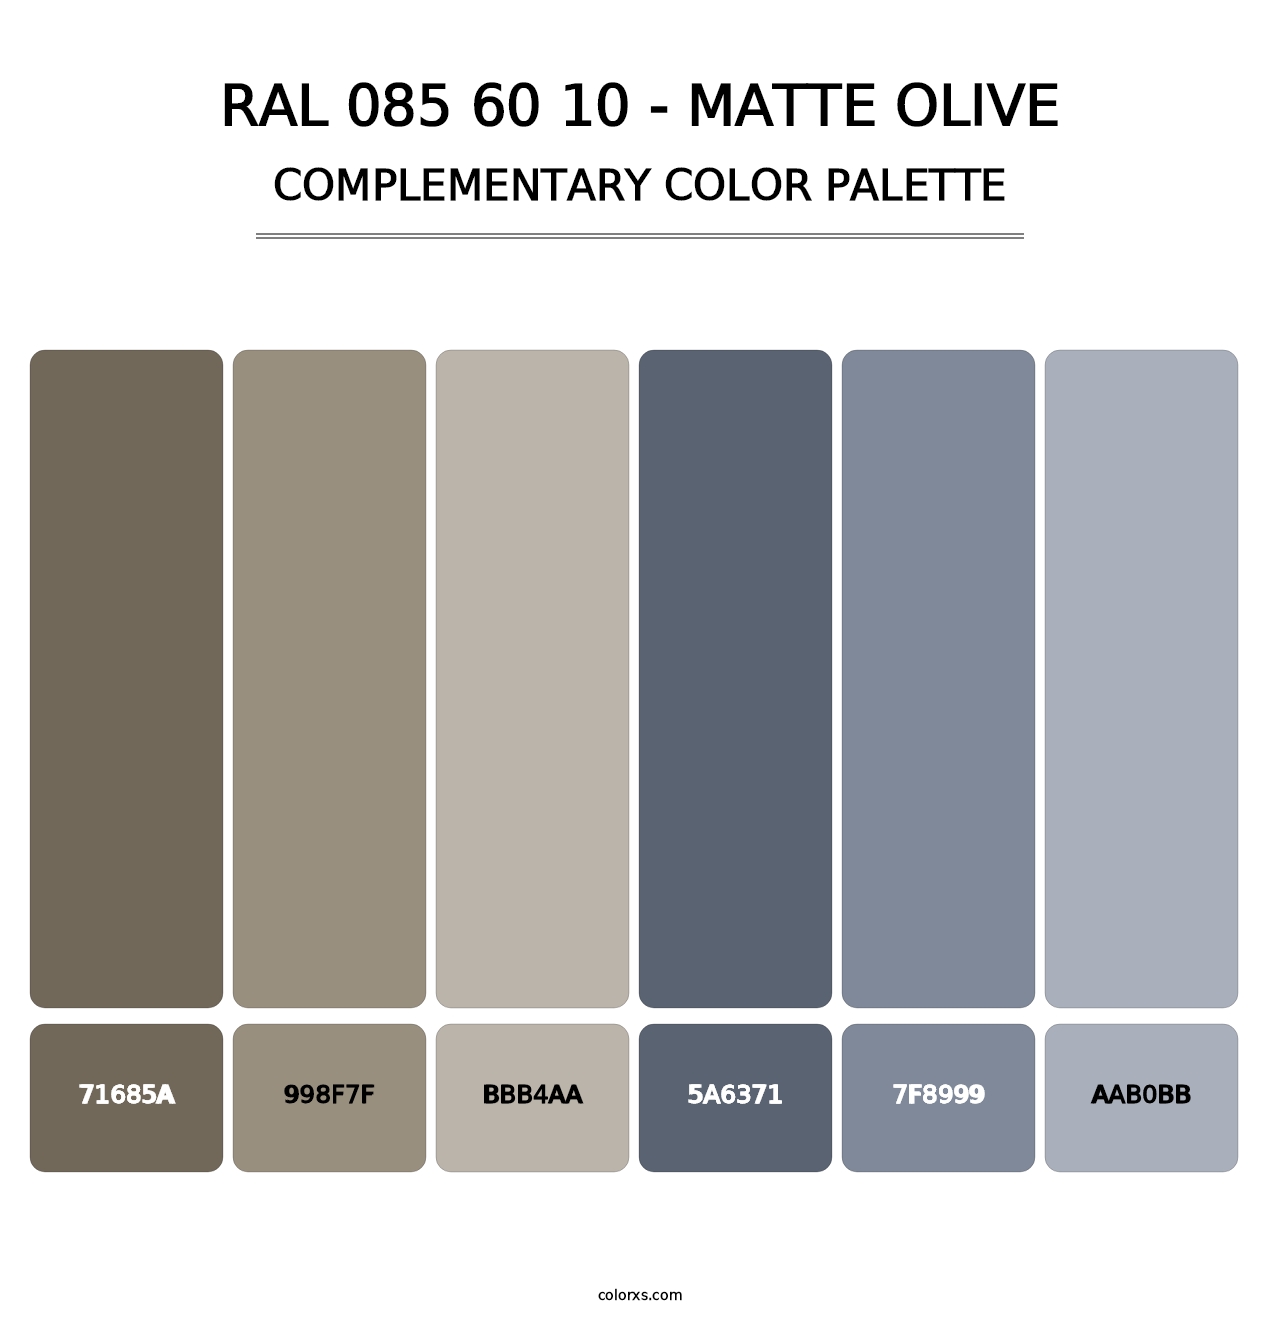 RAL 085 60 10 - Matte Olive - Complementary Color Palette